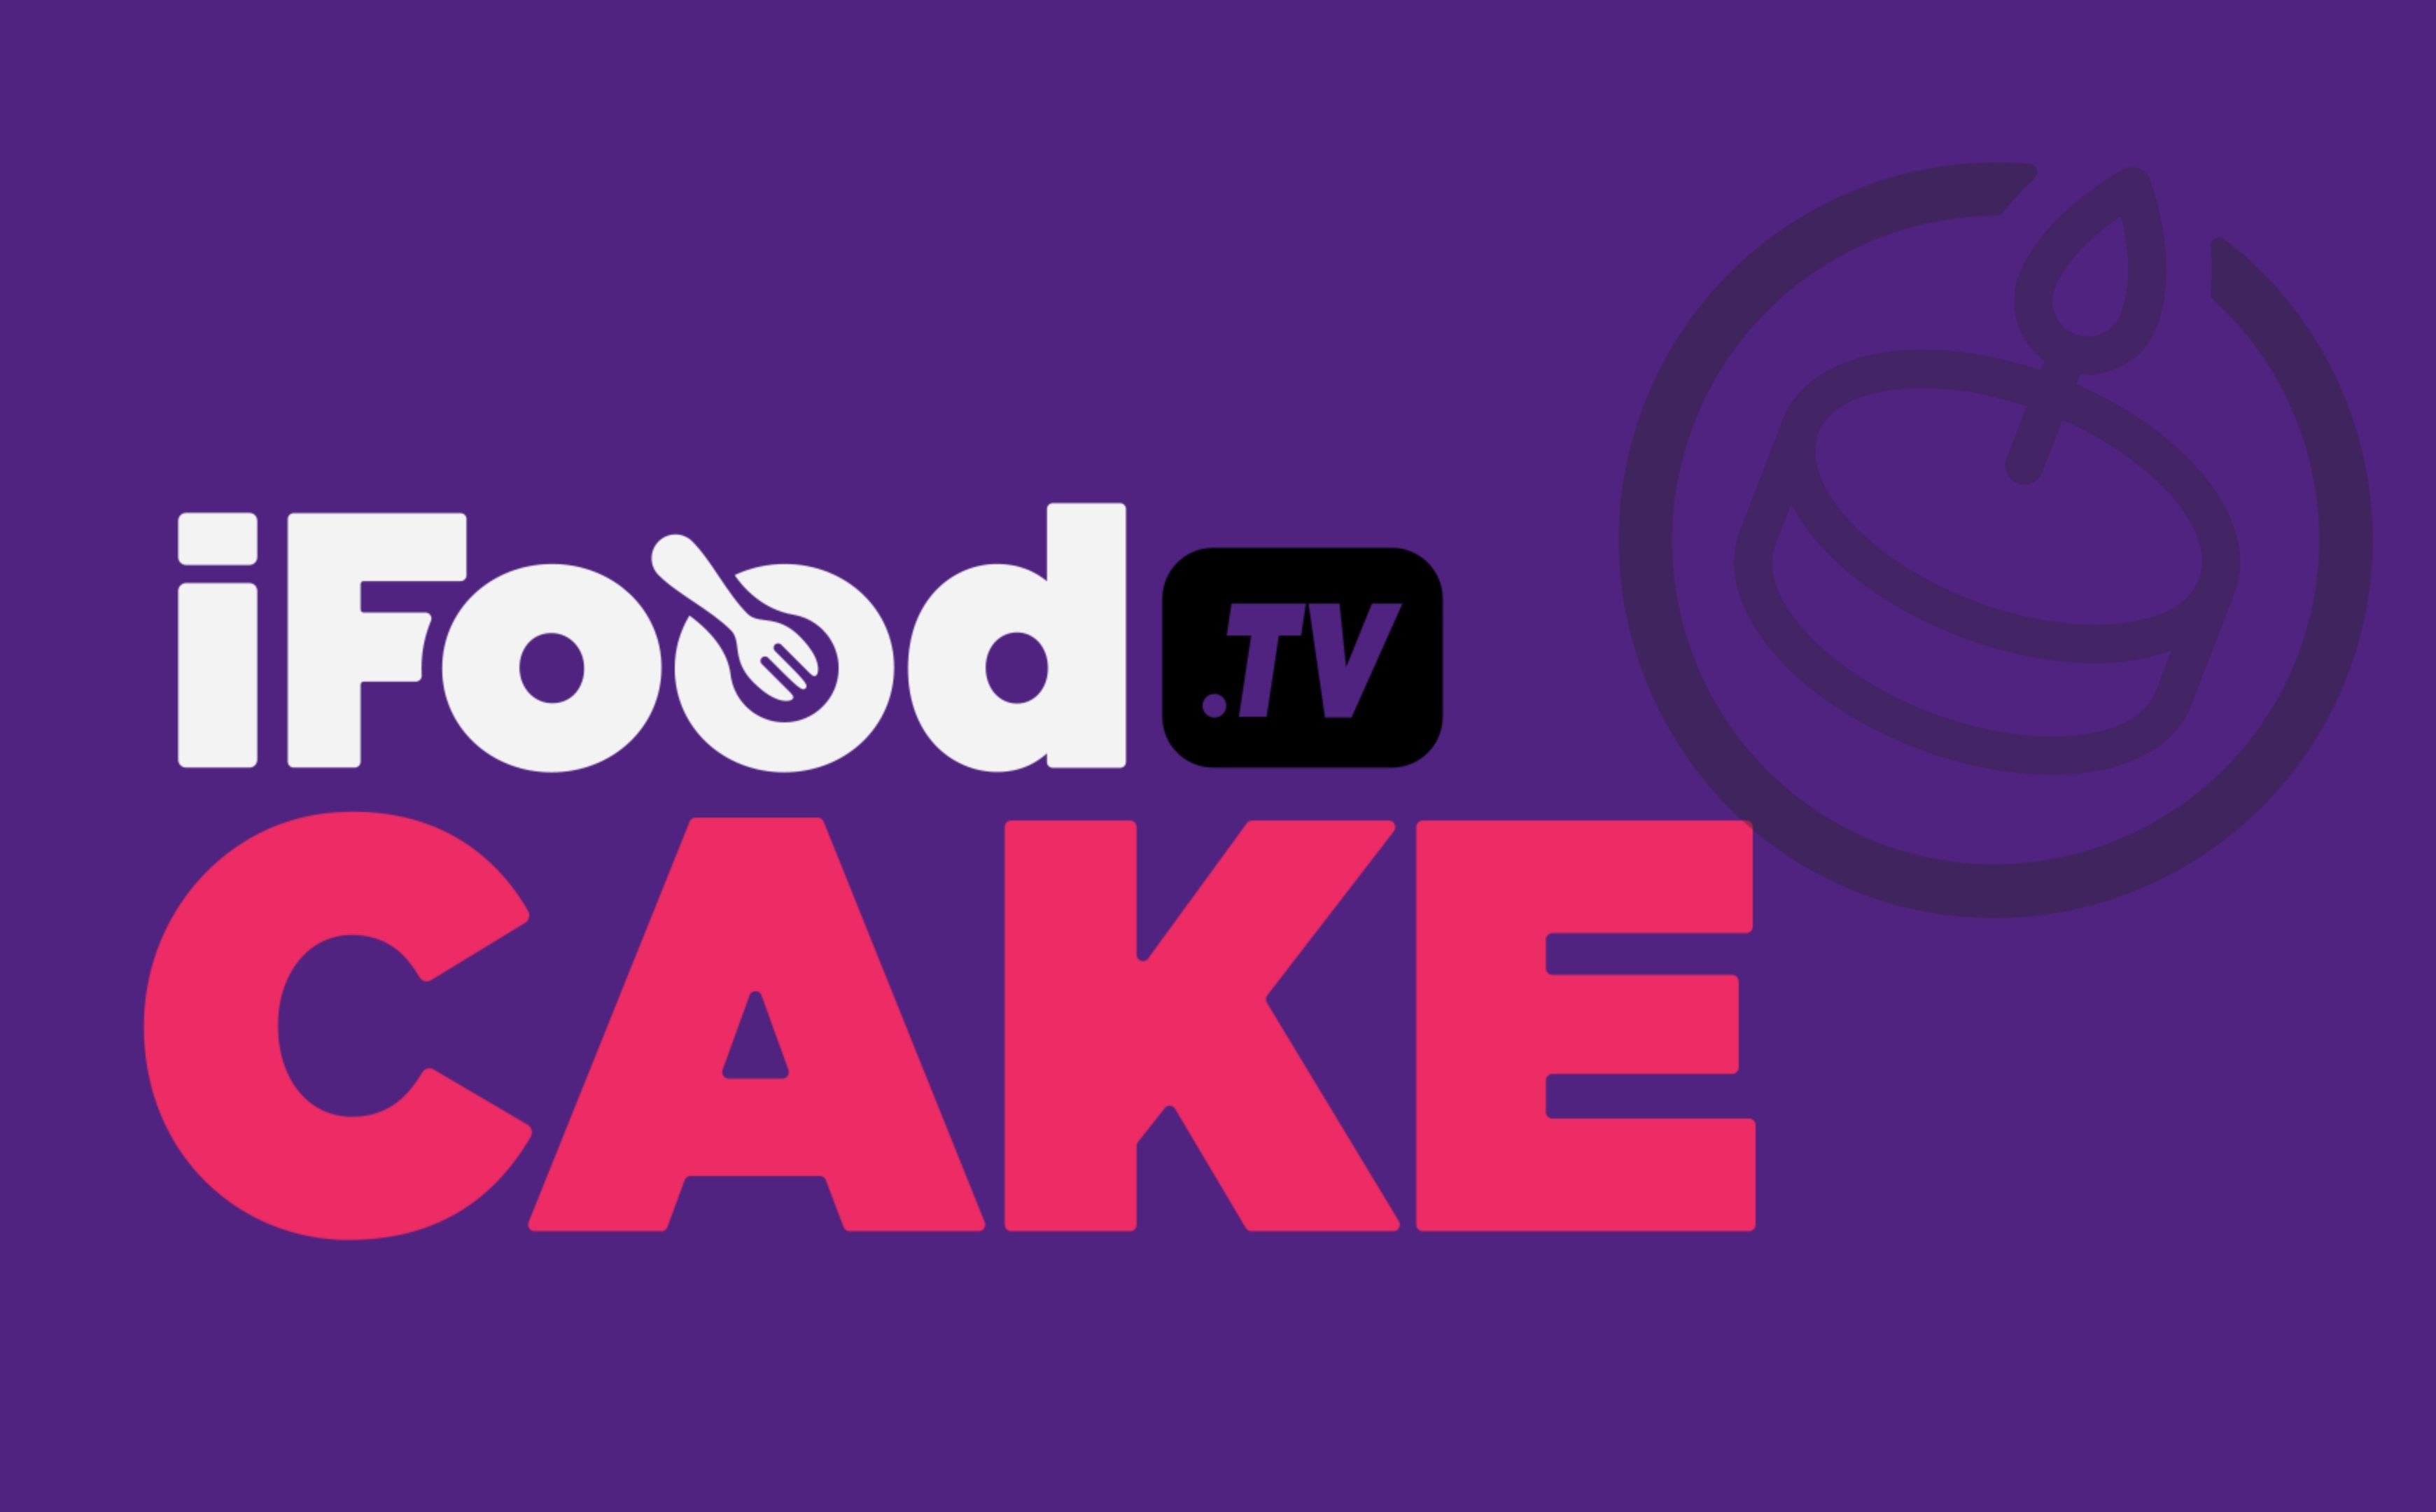 Cakes by IFood.tv